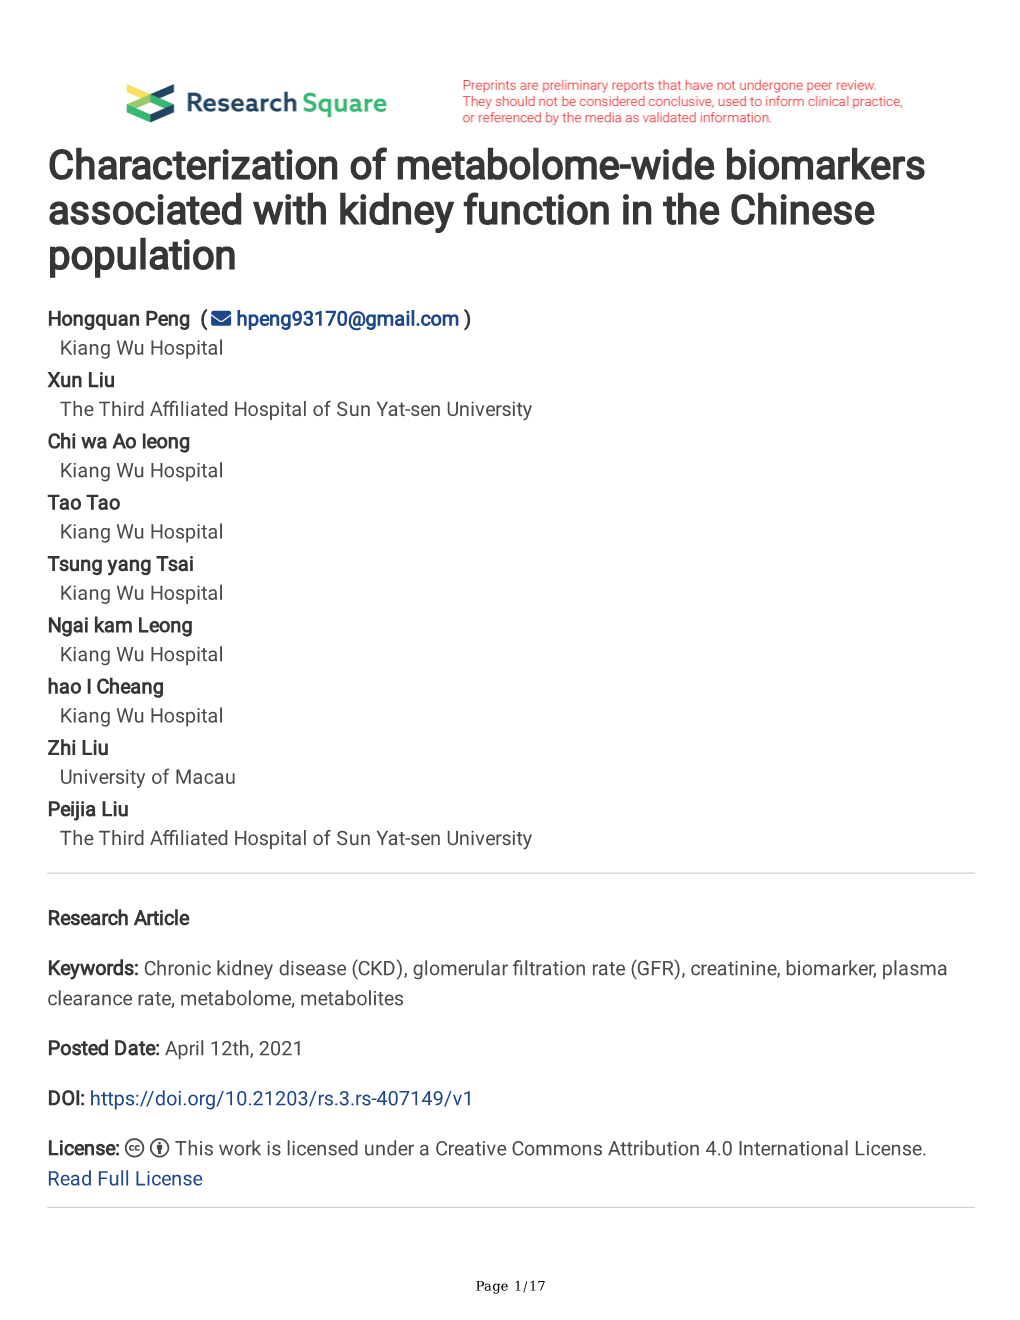 Characterization of Metabolome-Wide Biomarkers Associated with Kidney Function in the Chinese Population